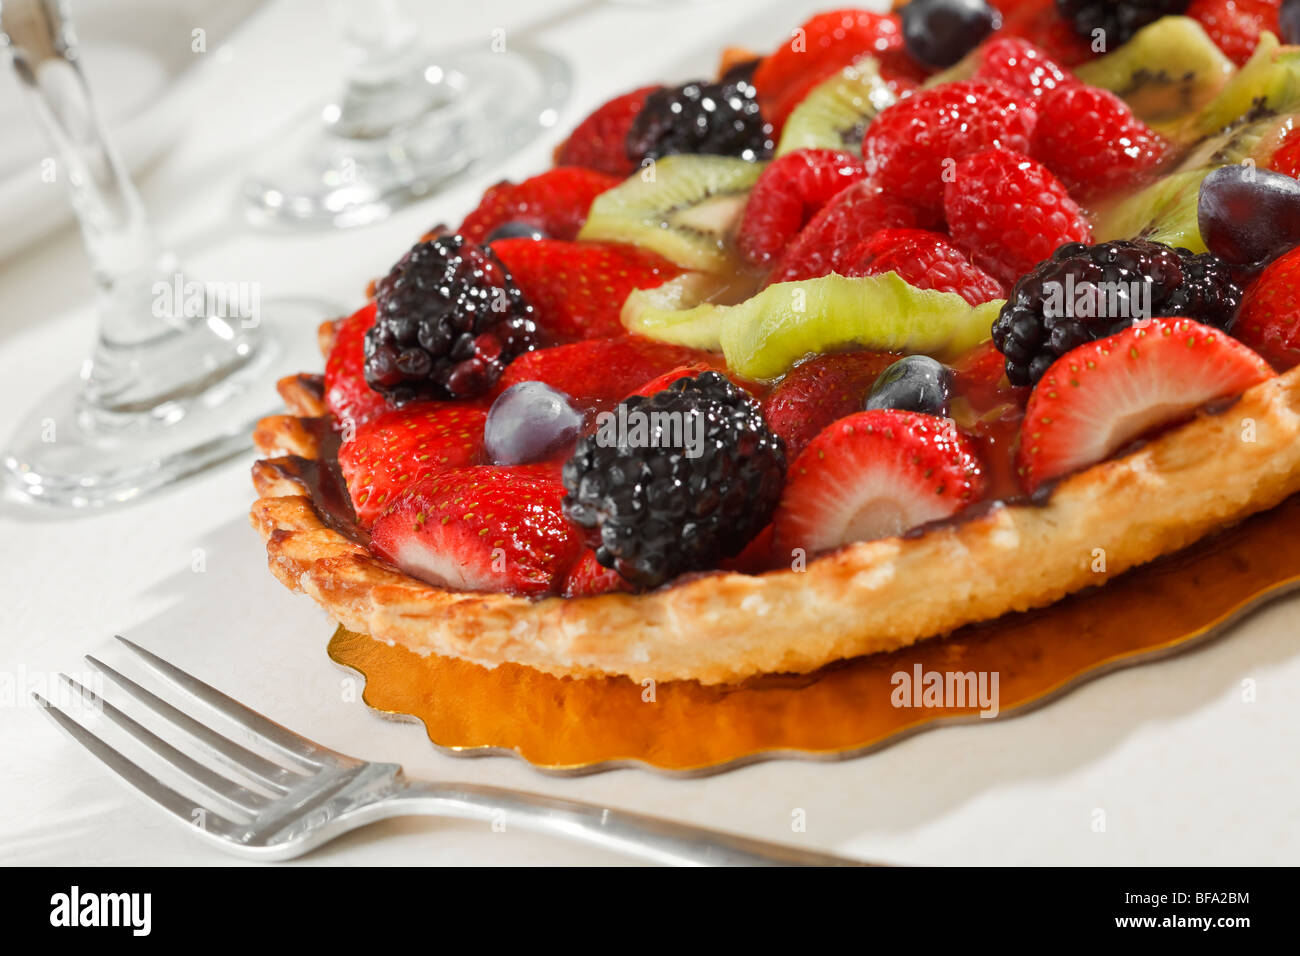 Fruit Torte with Strawberries, Boysenberries, Kiwi and Grapes. Stock Photo